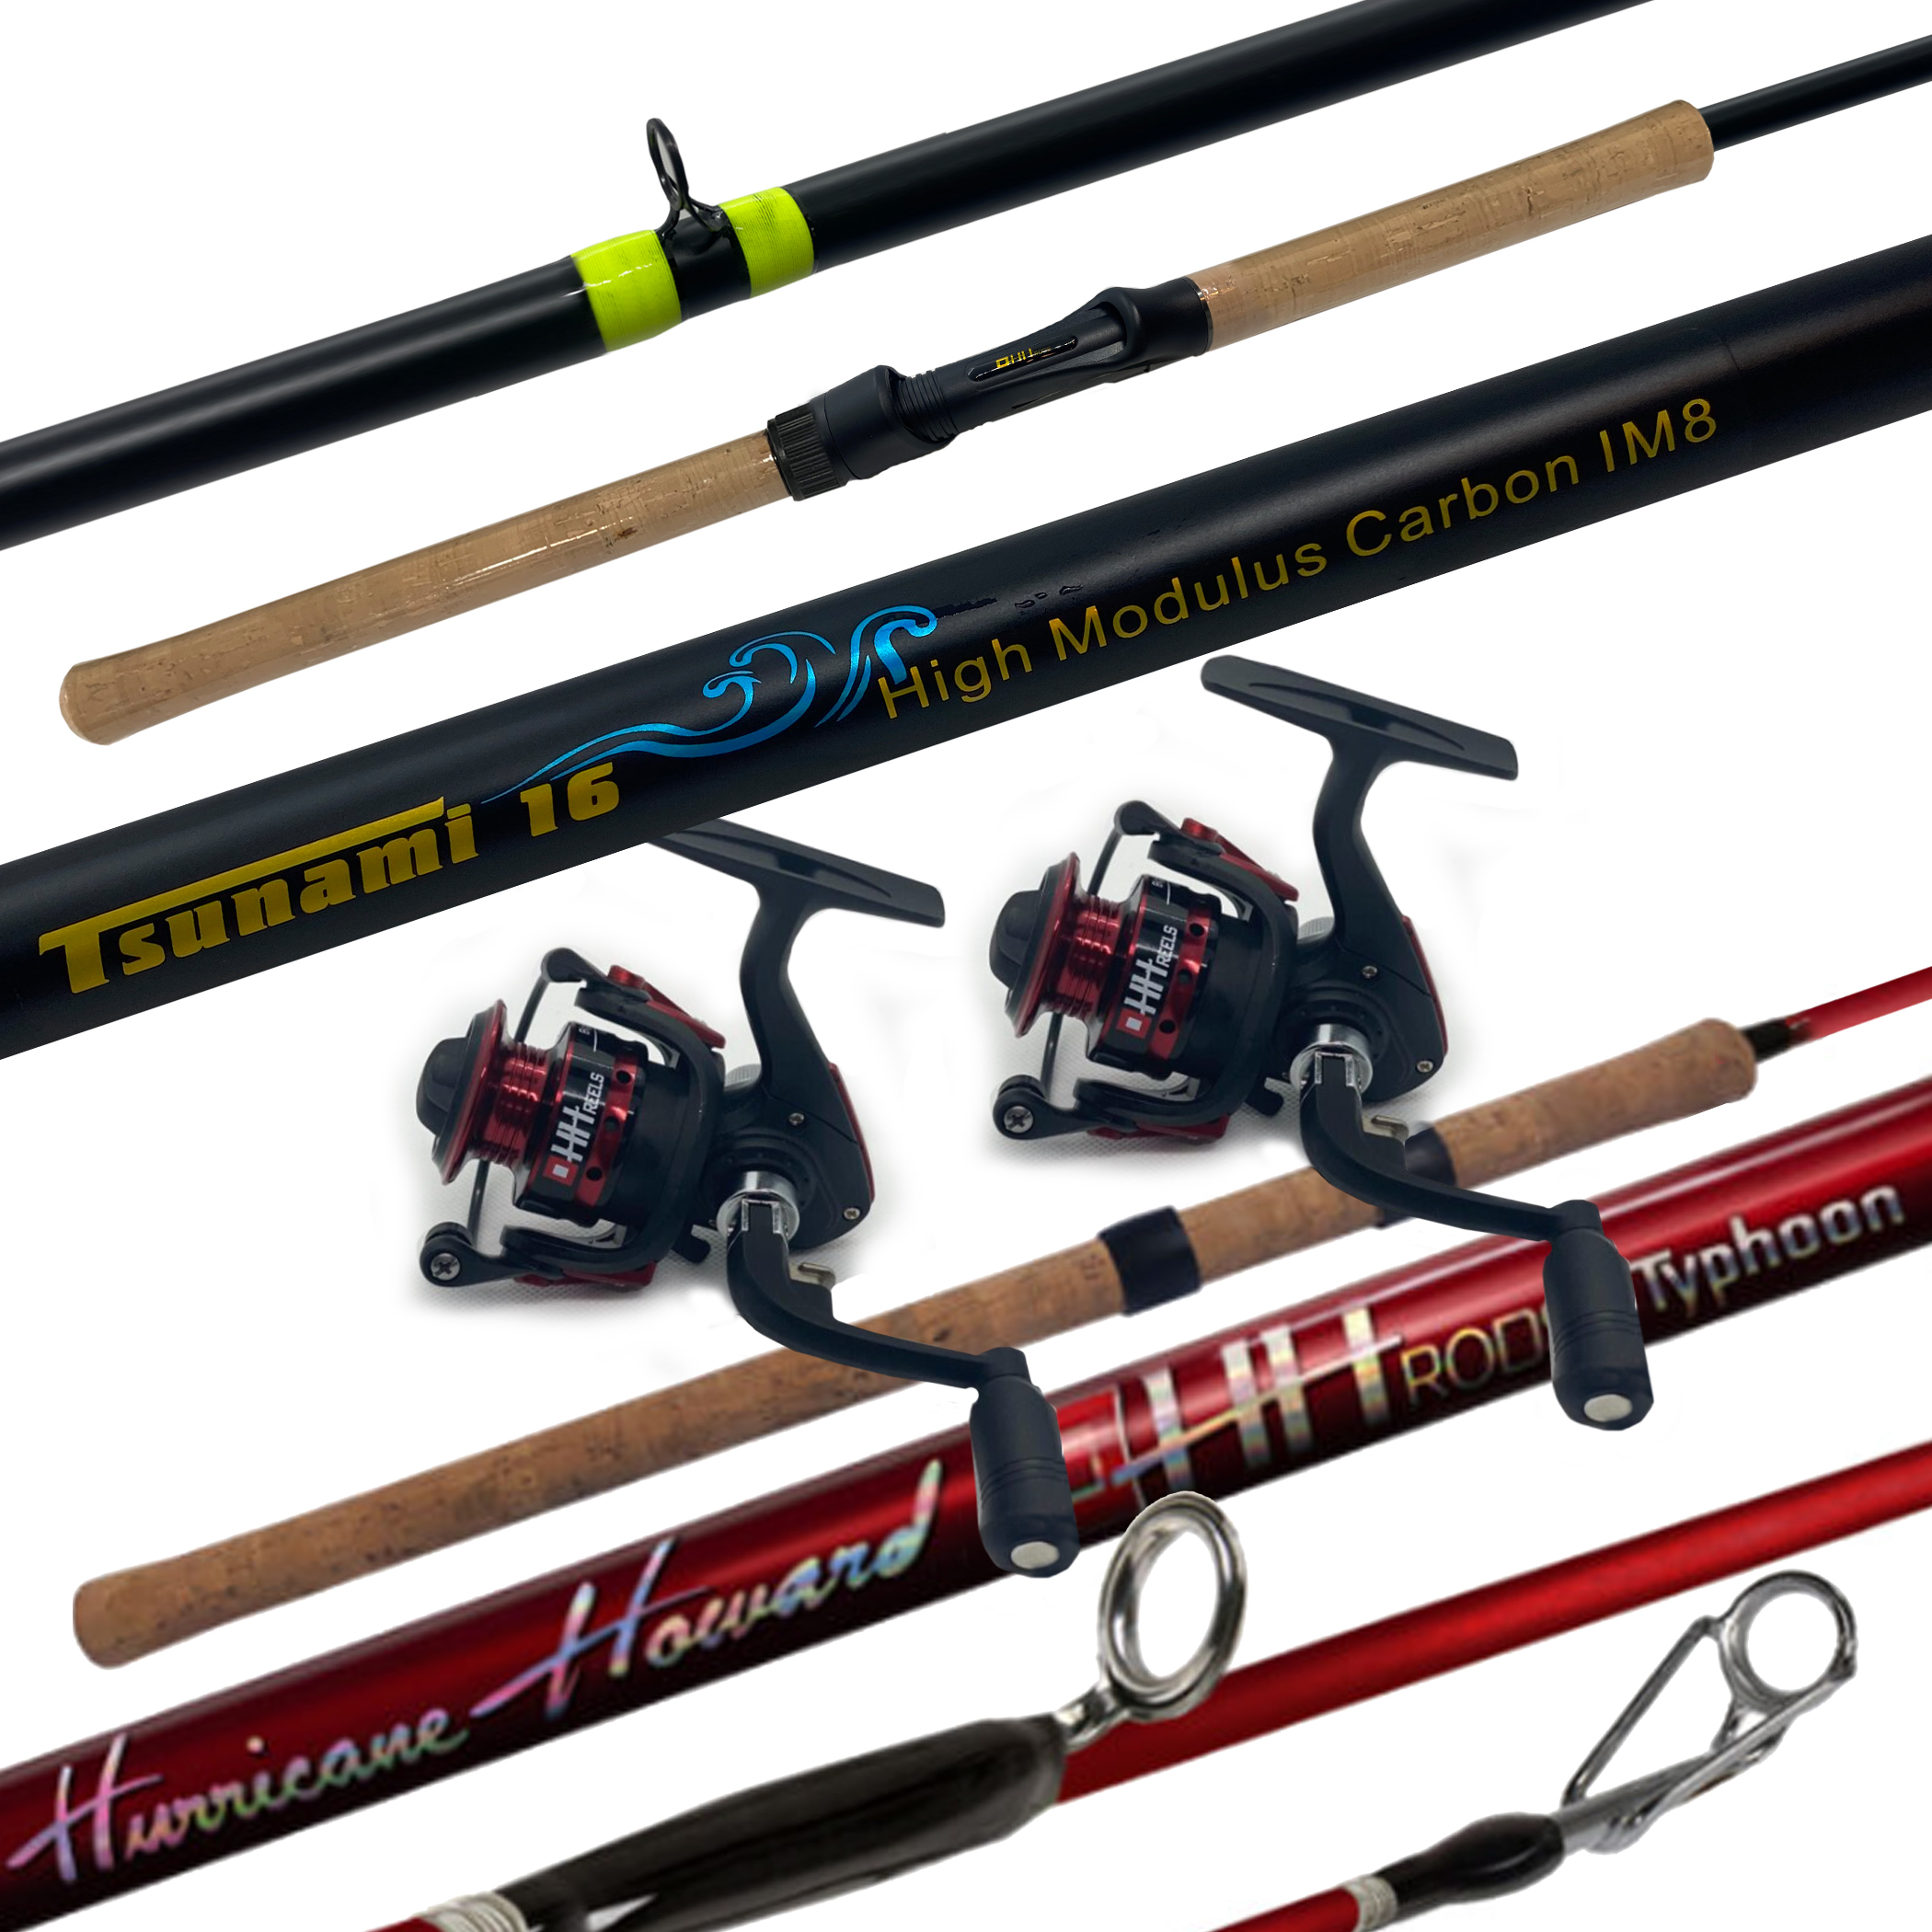 Scope Package # 3 – HH Rods and Reels